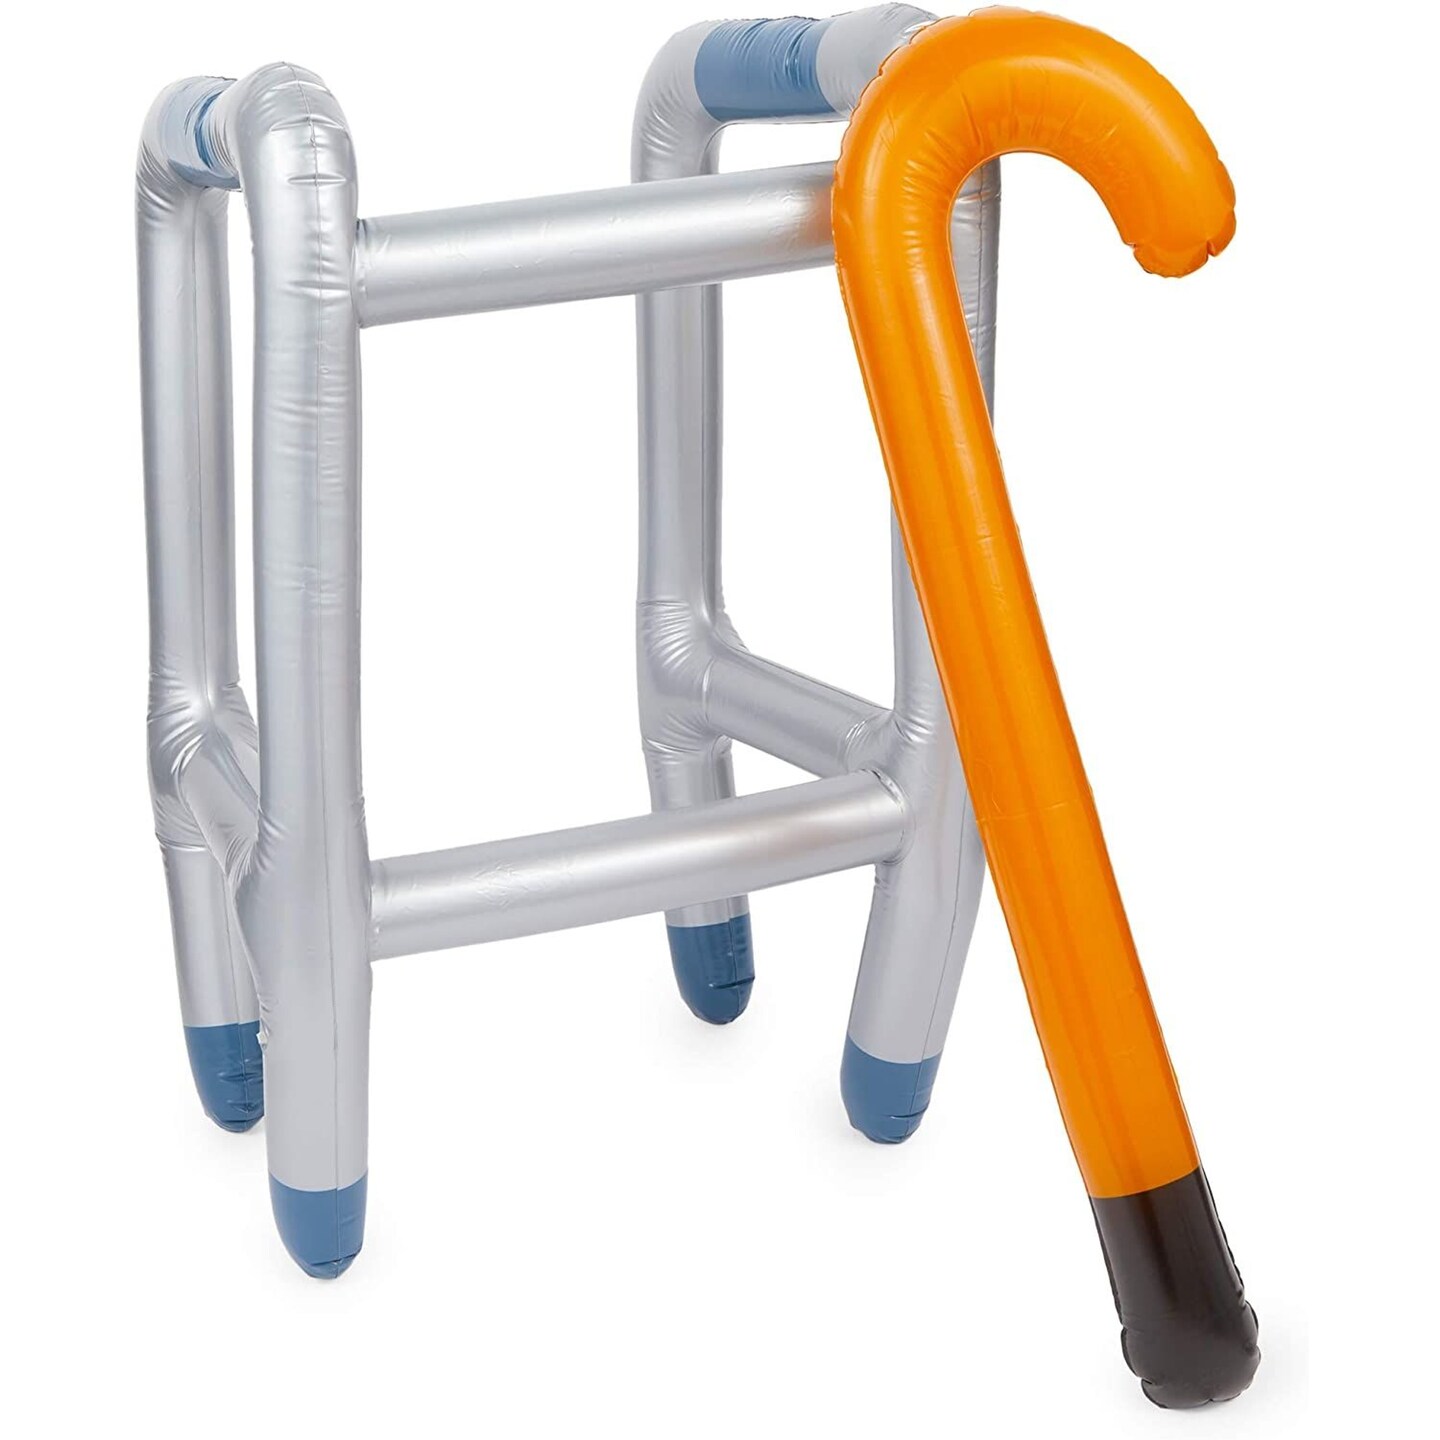 Inflatable Walker and Cane, Over The Hill Gag Gift (2 Pieces